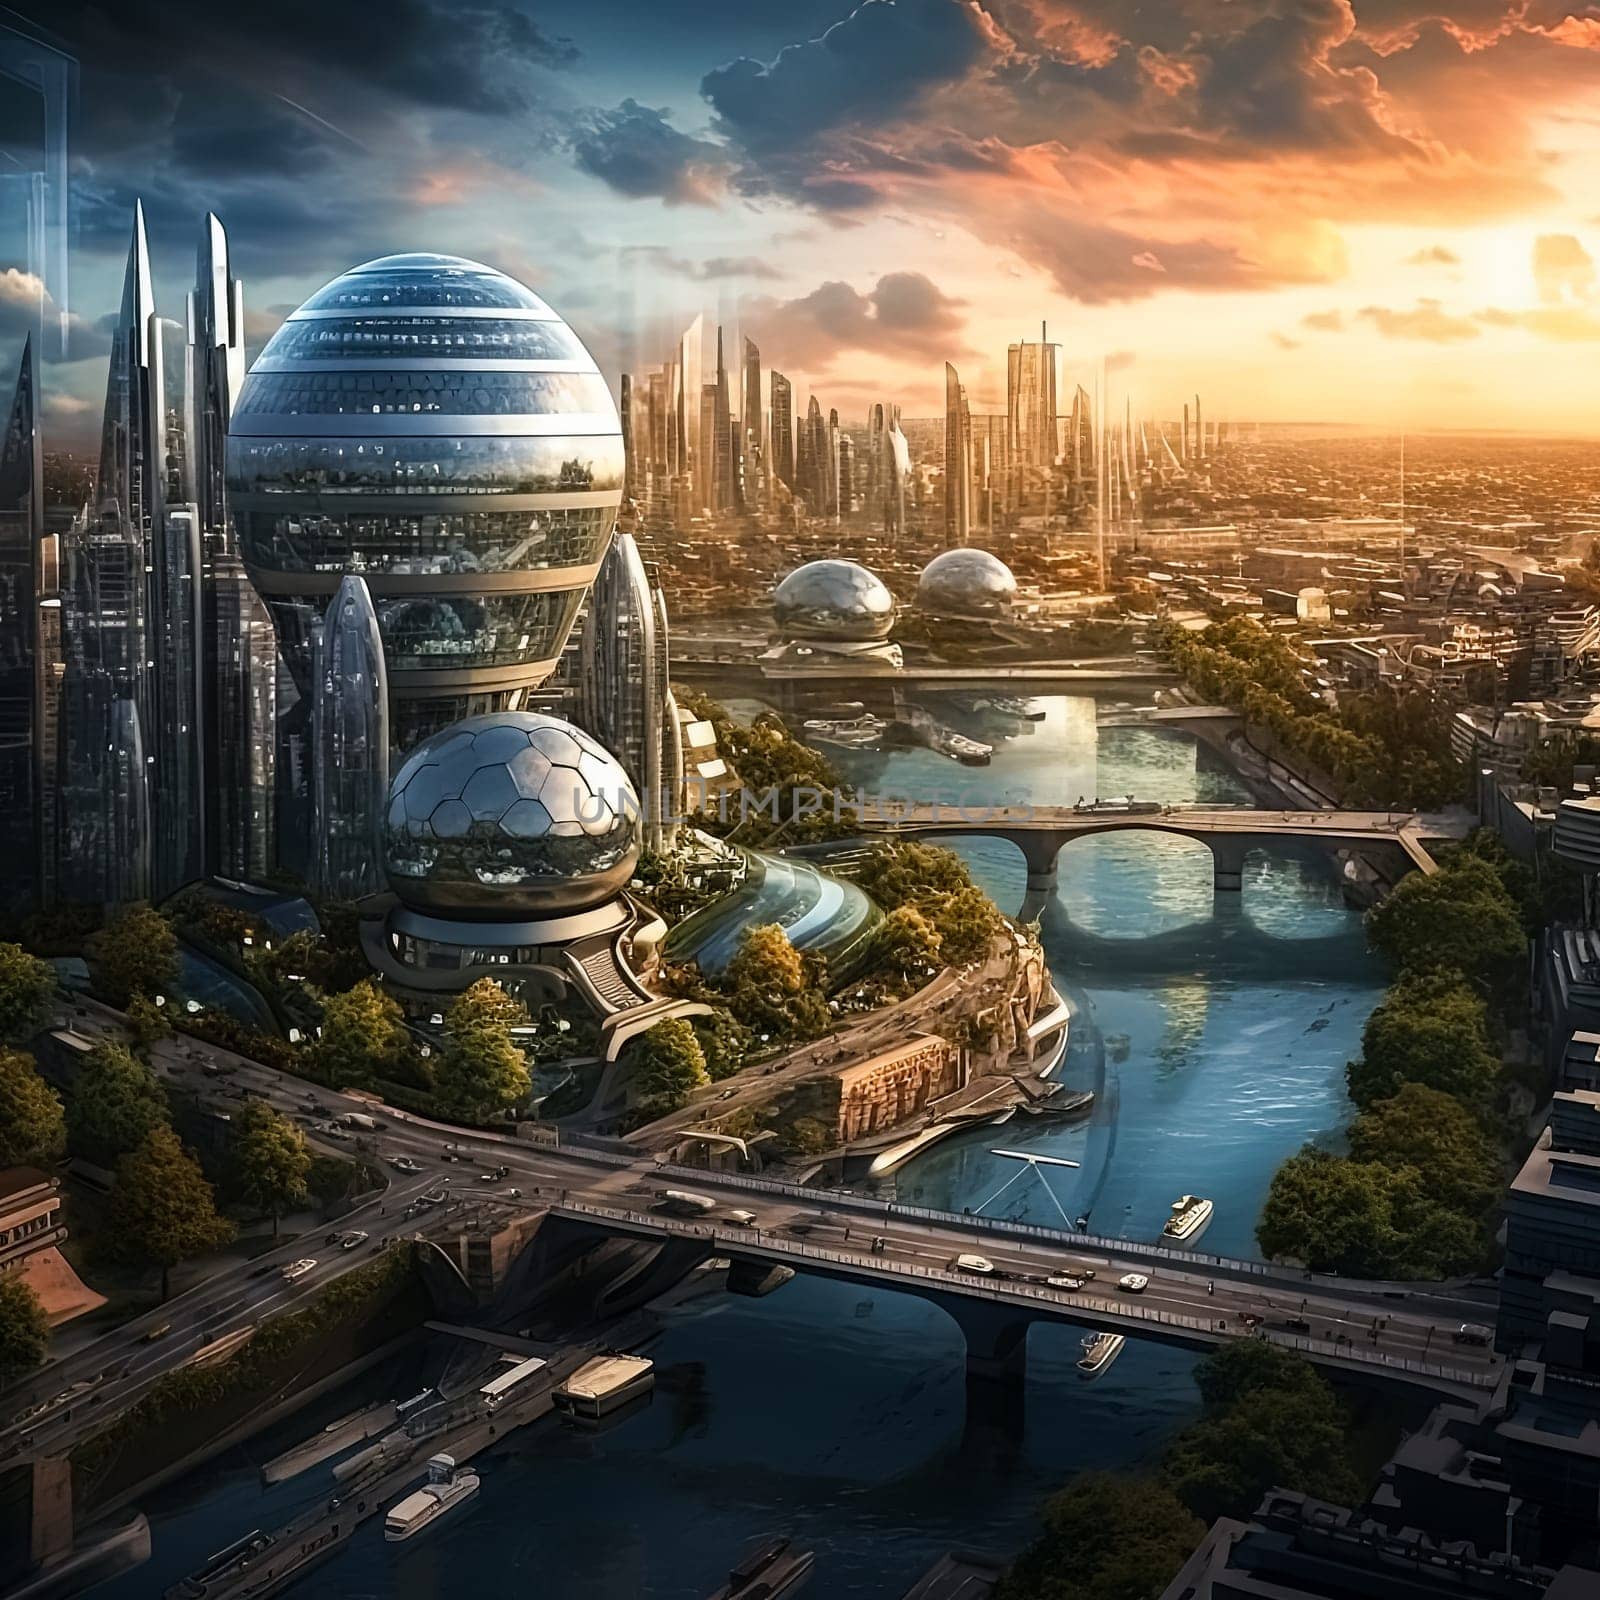 A futuristic city with tall buildings and a bridge. The city is filled with people and cars, and there are many buildings with domes. The sky is blue and there are clouds